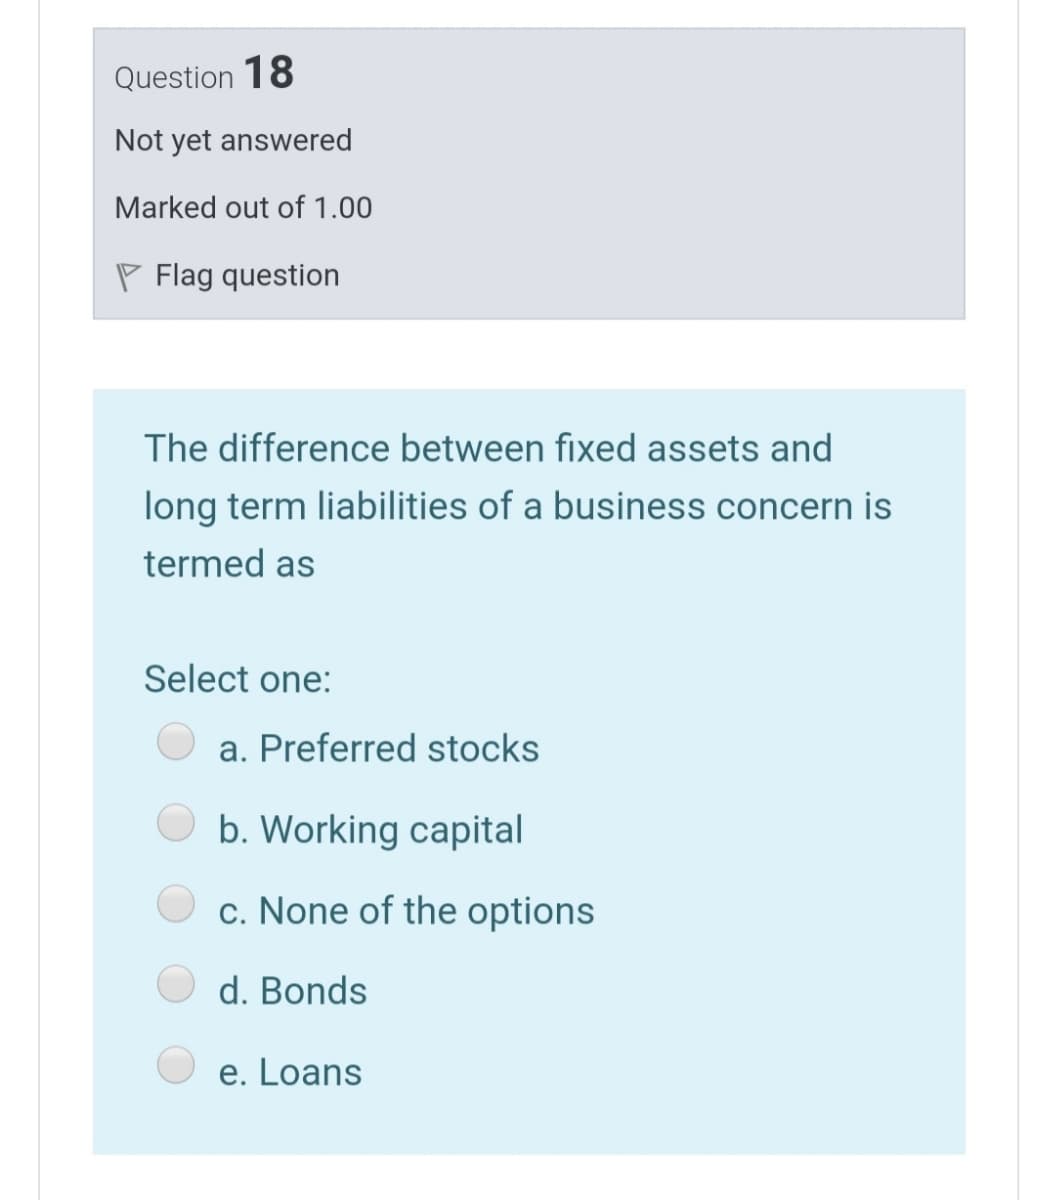 Question 18
Not yet answered
Marked out of 1.00
P Flag question
The difference between fixed assets and
long term liabilities of a business concern is
termed as
Select one:
a. Preferred stocks
b. Working capital
c. None of the options
d. Bonds
e. Loans
